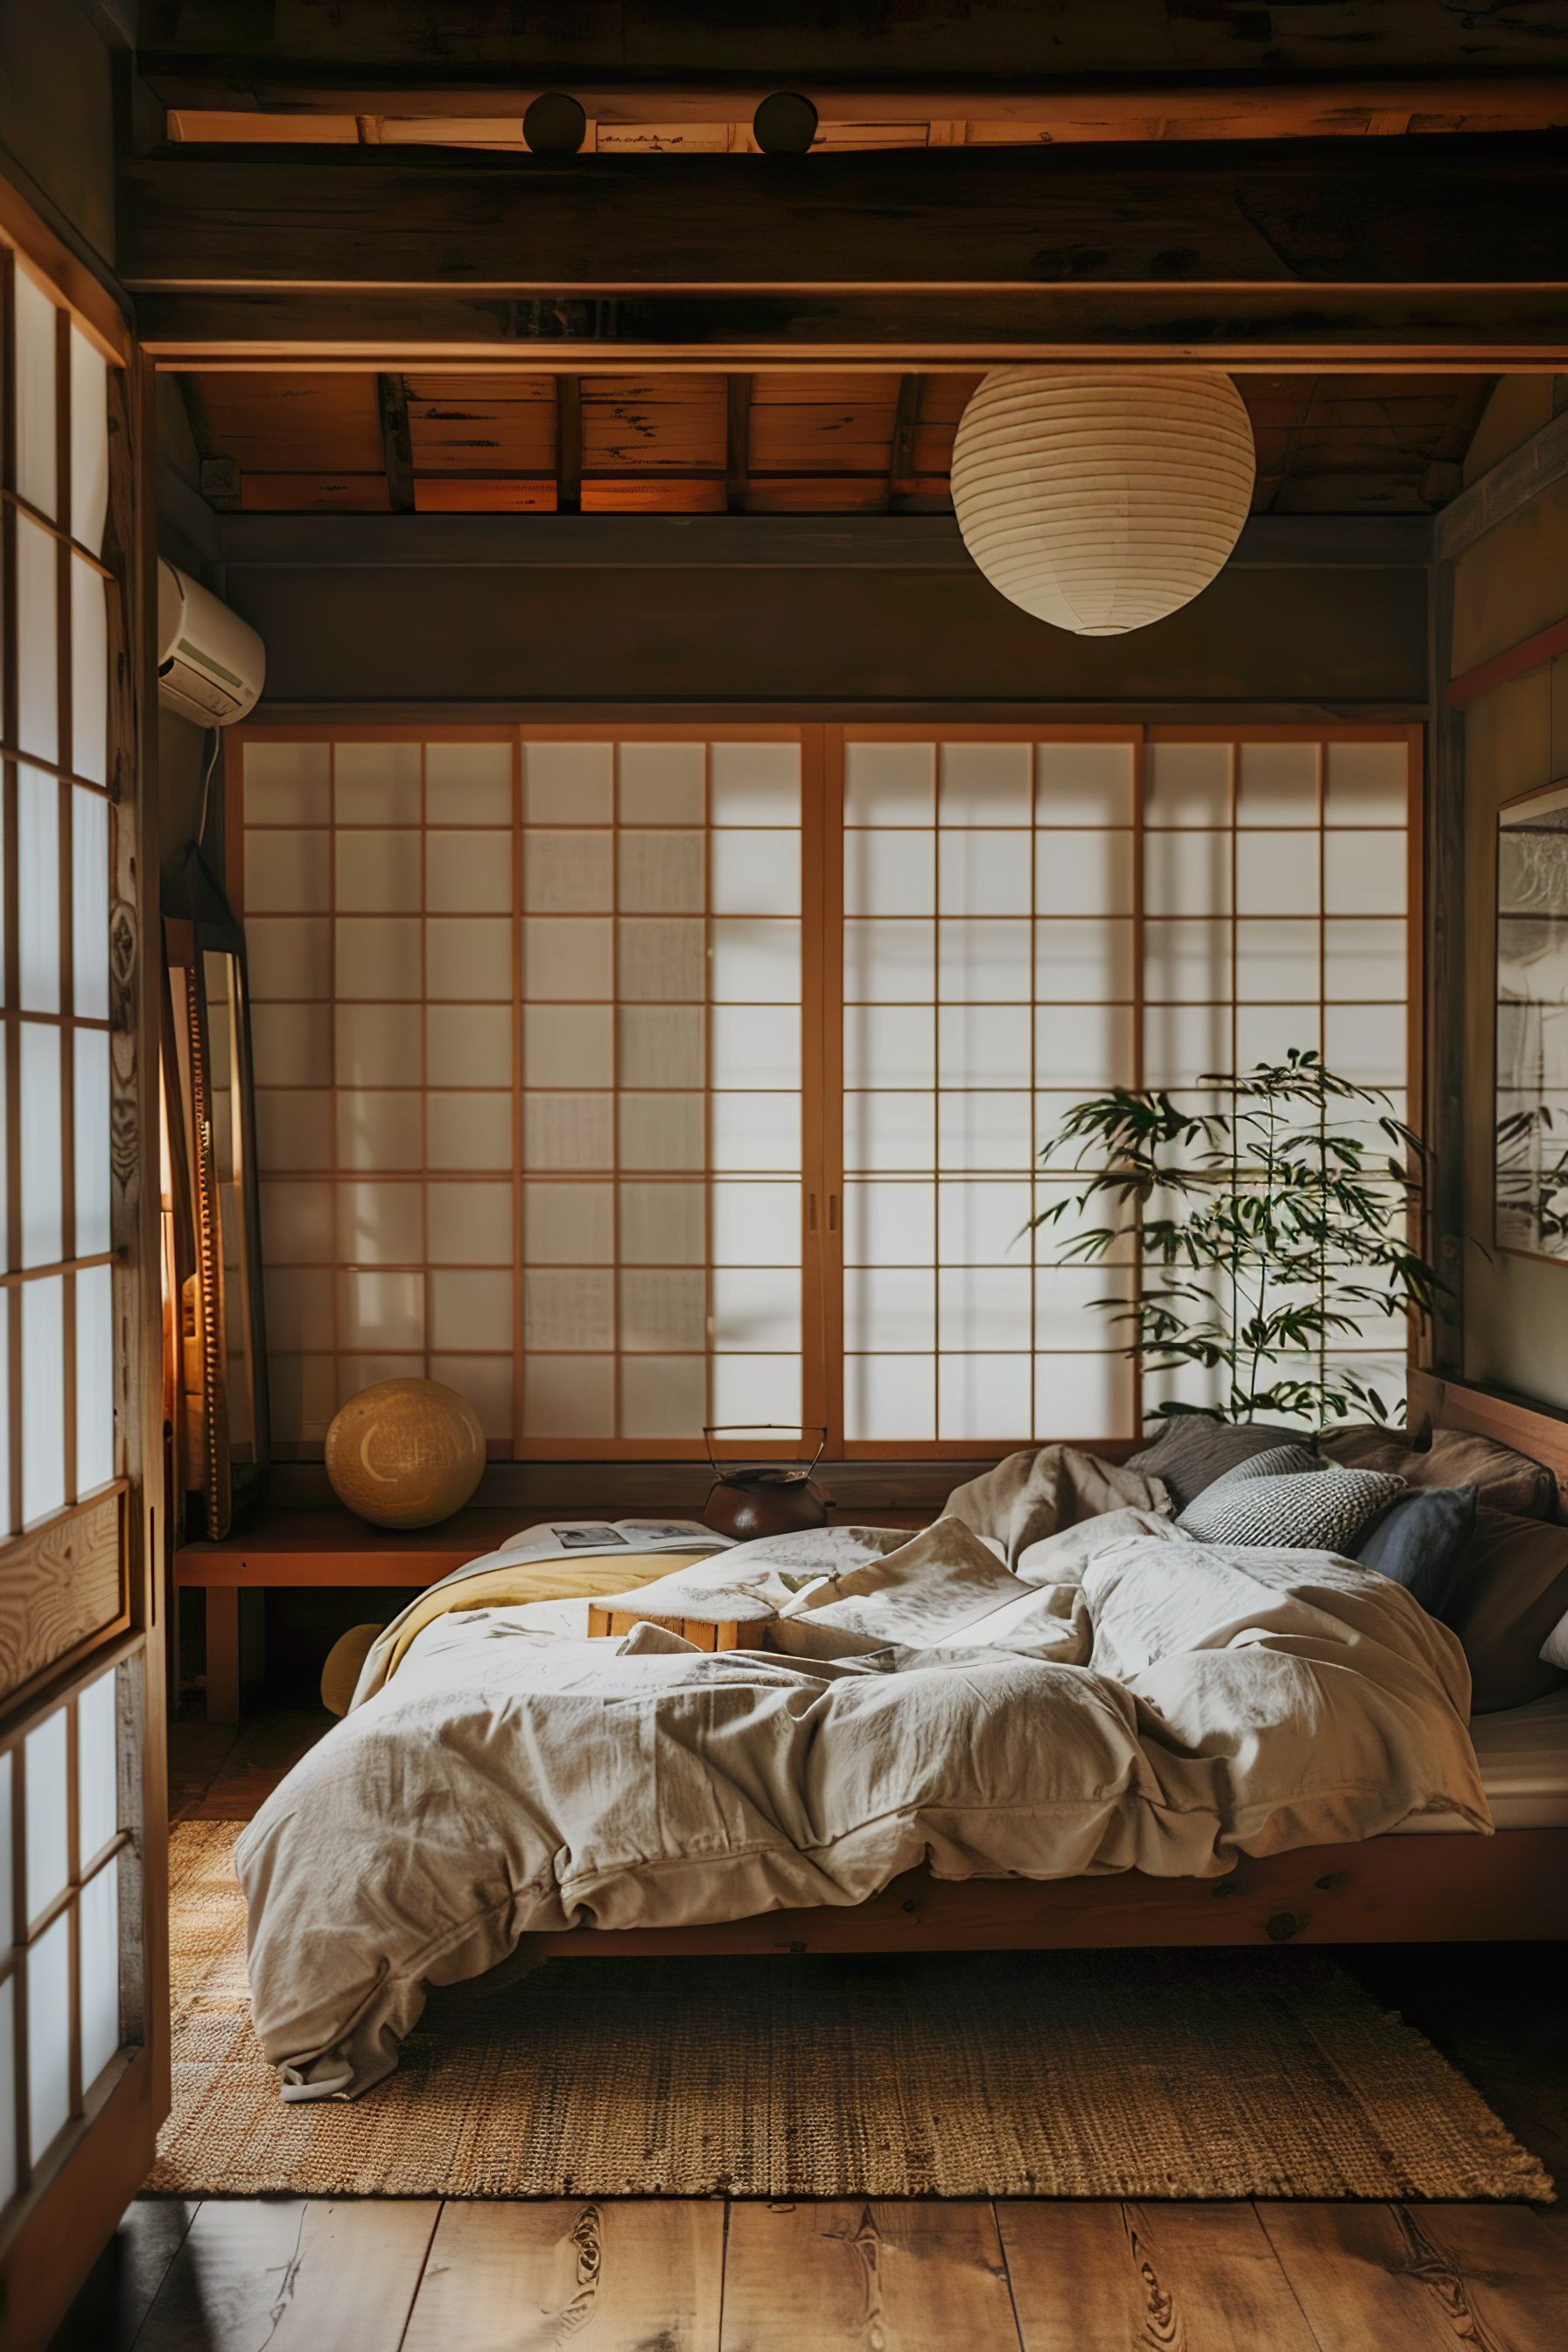 ALT text: A cozy traditional Japanese room with tatami flooring, a low bed, shoji sliding doors, a paper lantern, and a serene atmosphere.